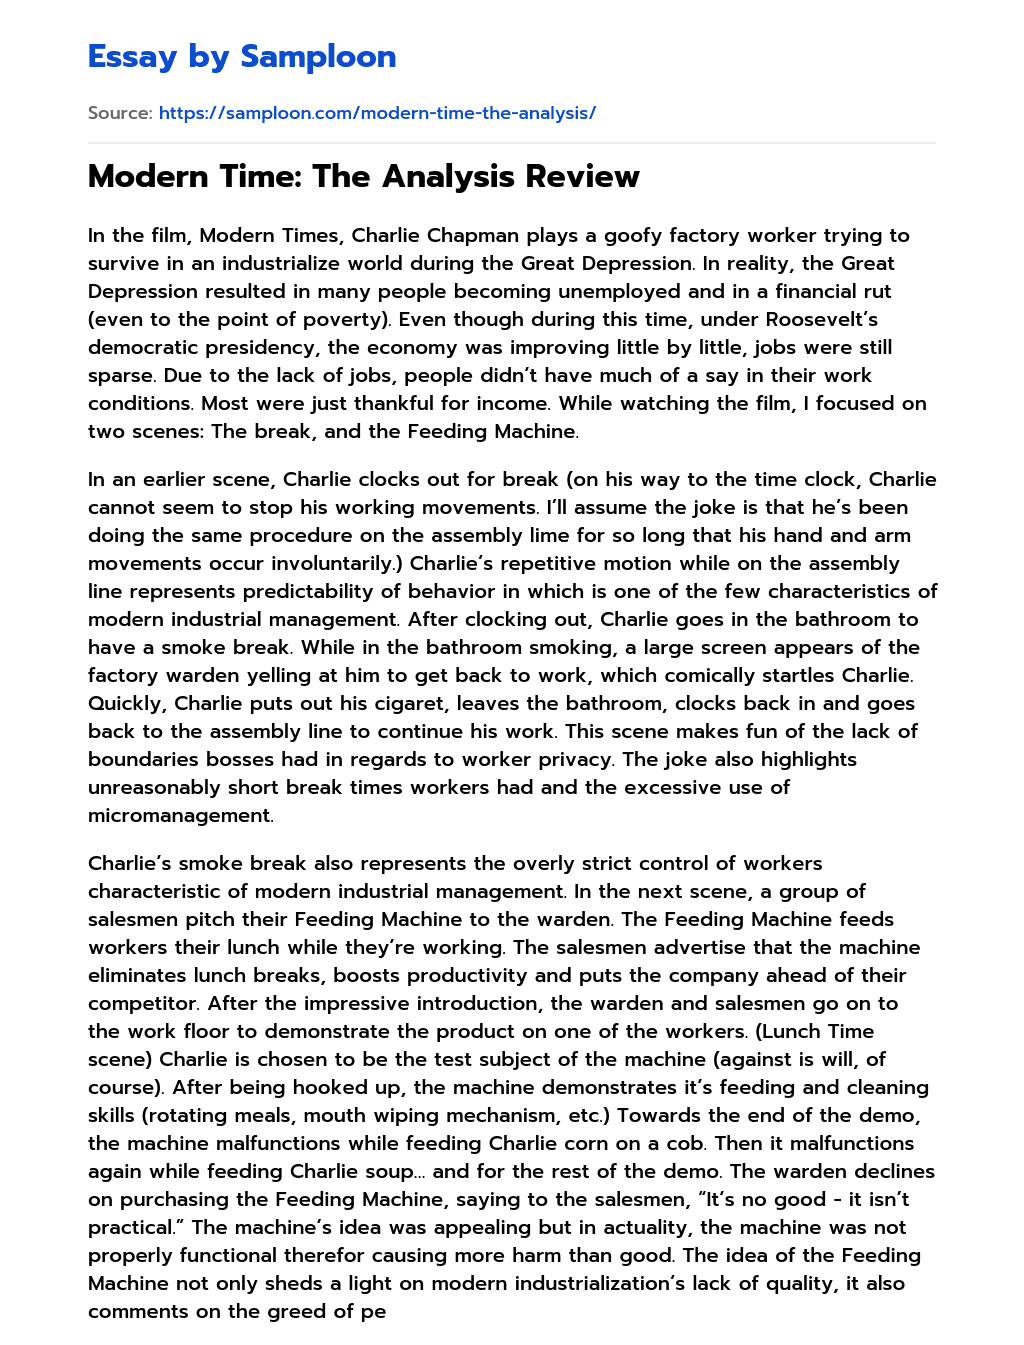 Modern Time: The Analysis Review essay